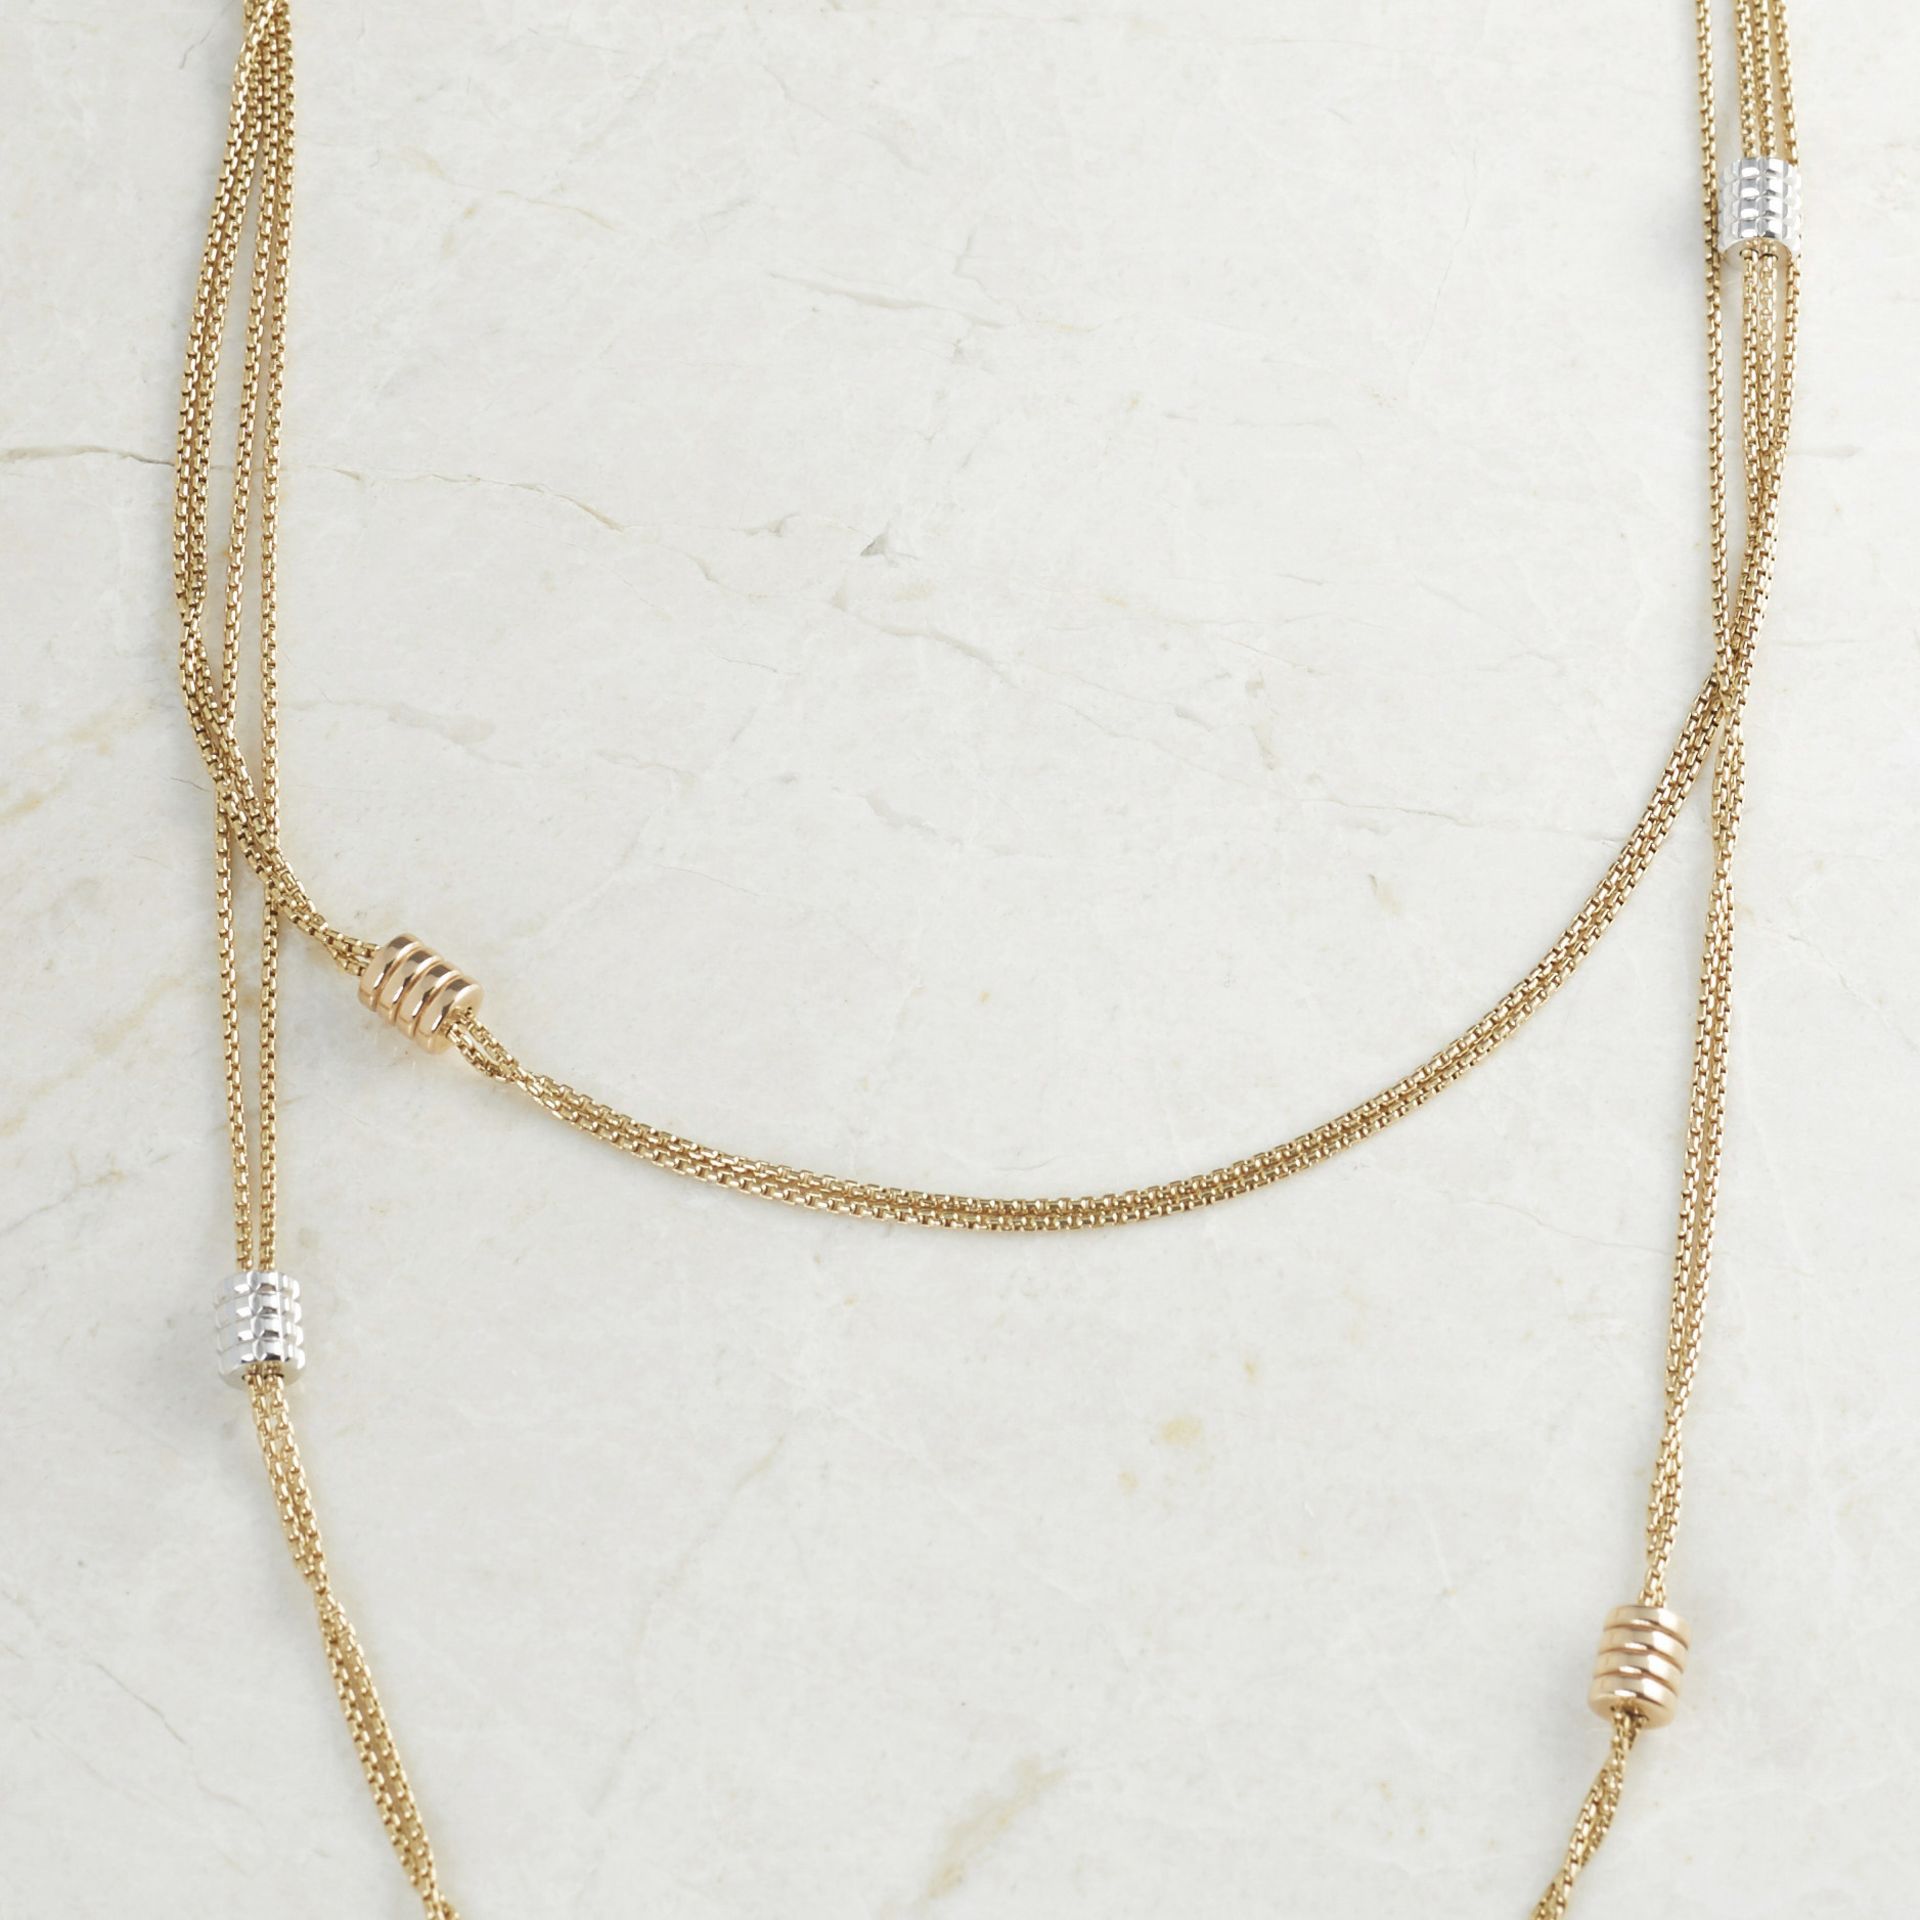 Boucheron 18k Yellow Gold Chain Necklace - Image 3 of 7